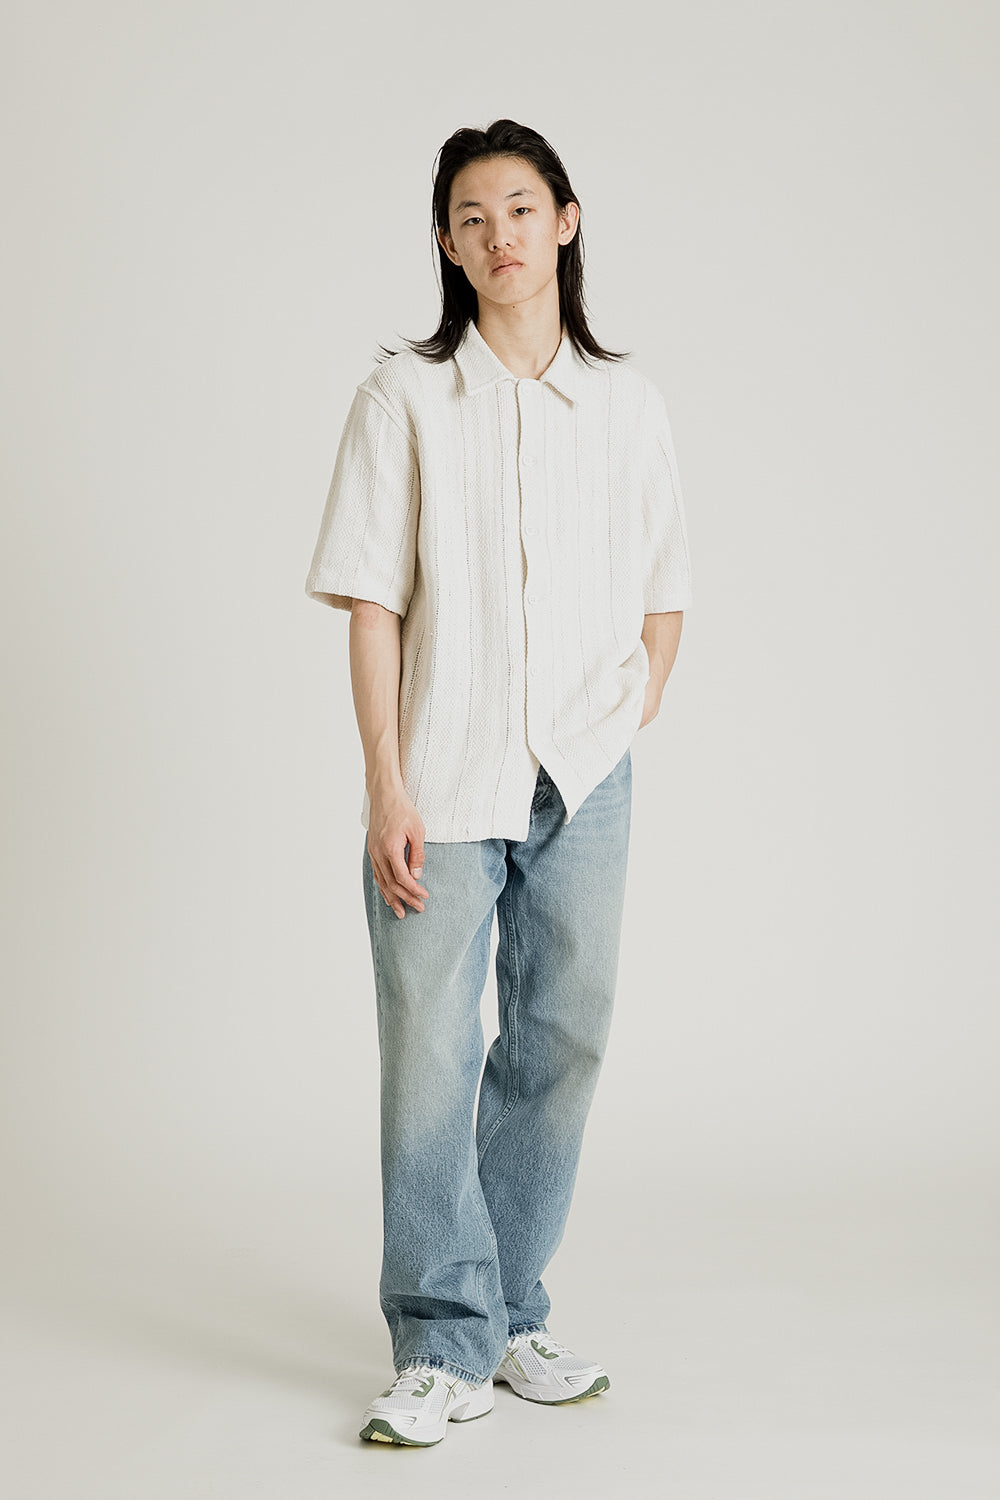 Sunflower Spacey SS Shirt in Off White | Wallace Mercantile Shop